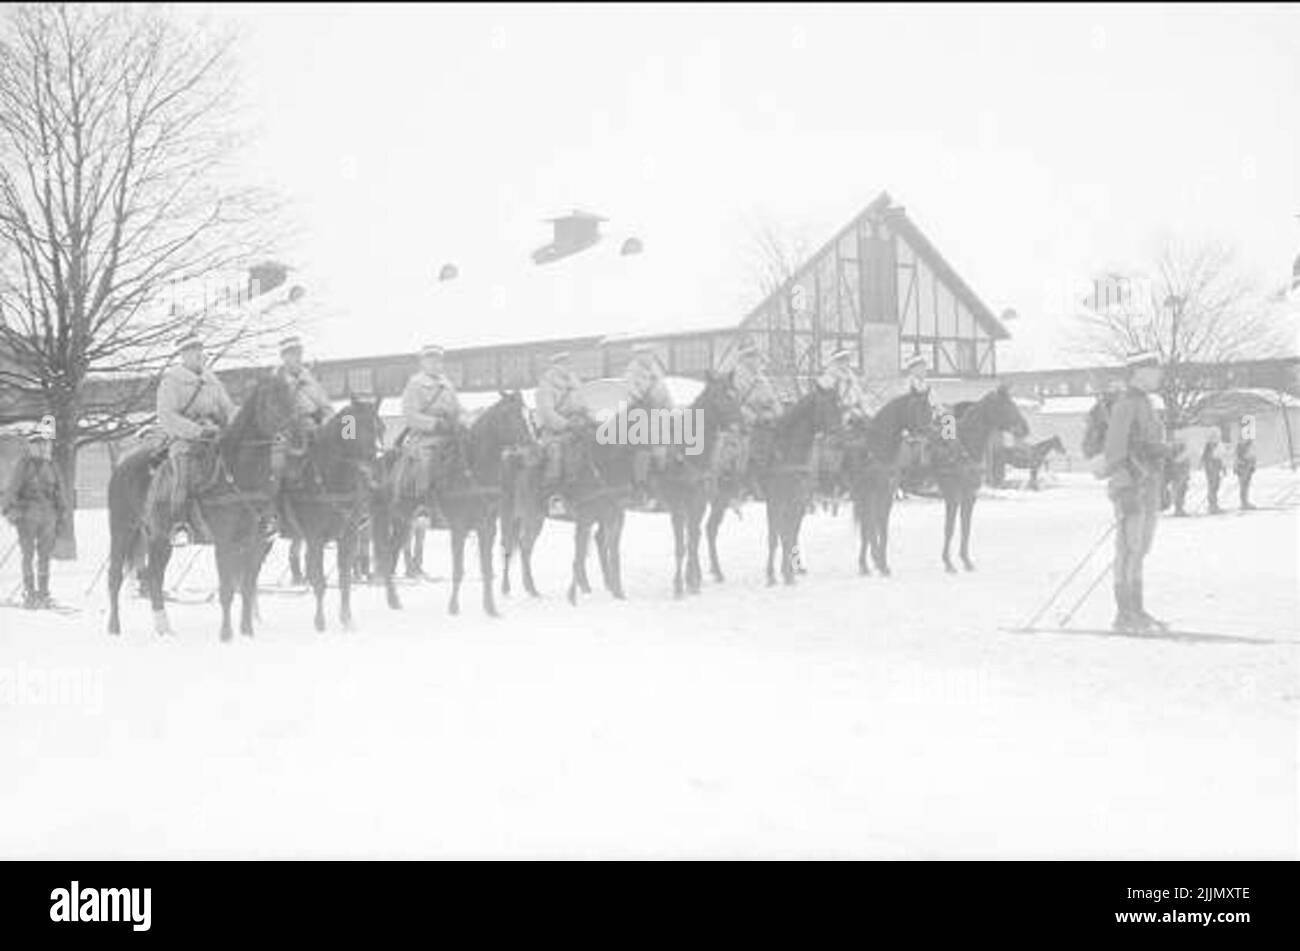 Rider platoon from 4. SKV winter organized. Pluton manager at skiing, plutch stf. on horseback. Two skiers interpret after each horse. Some horses pull sledding with heavy weapons after which a skier interpreted to be able to control the sledge and brake if necessary. Stock Photo